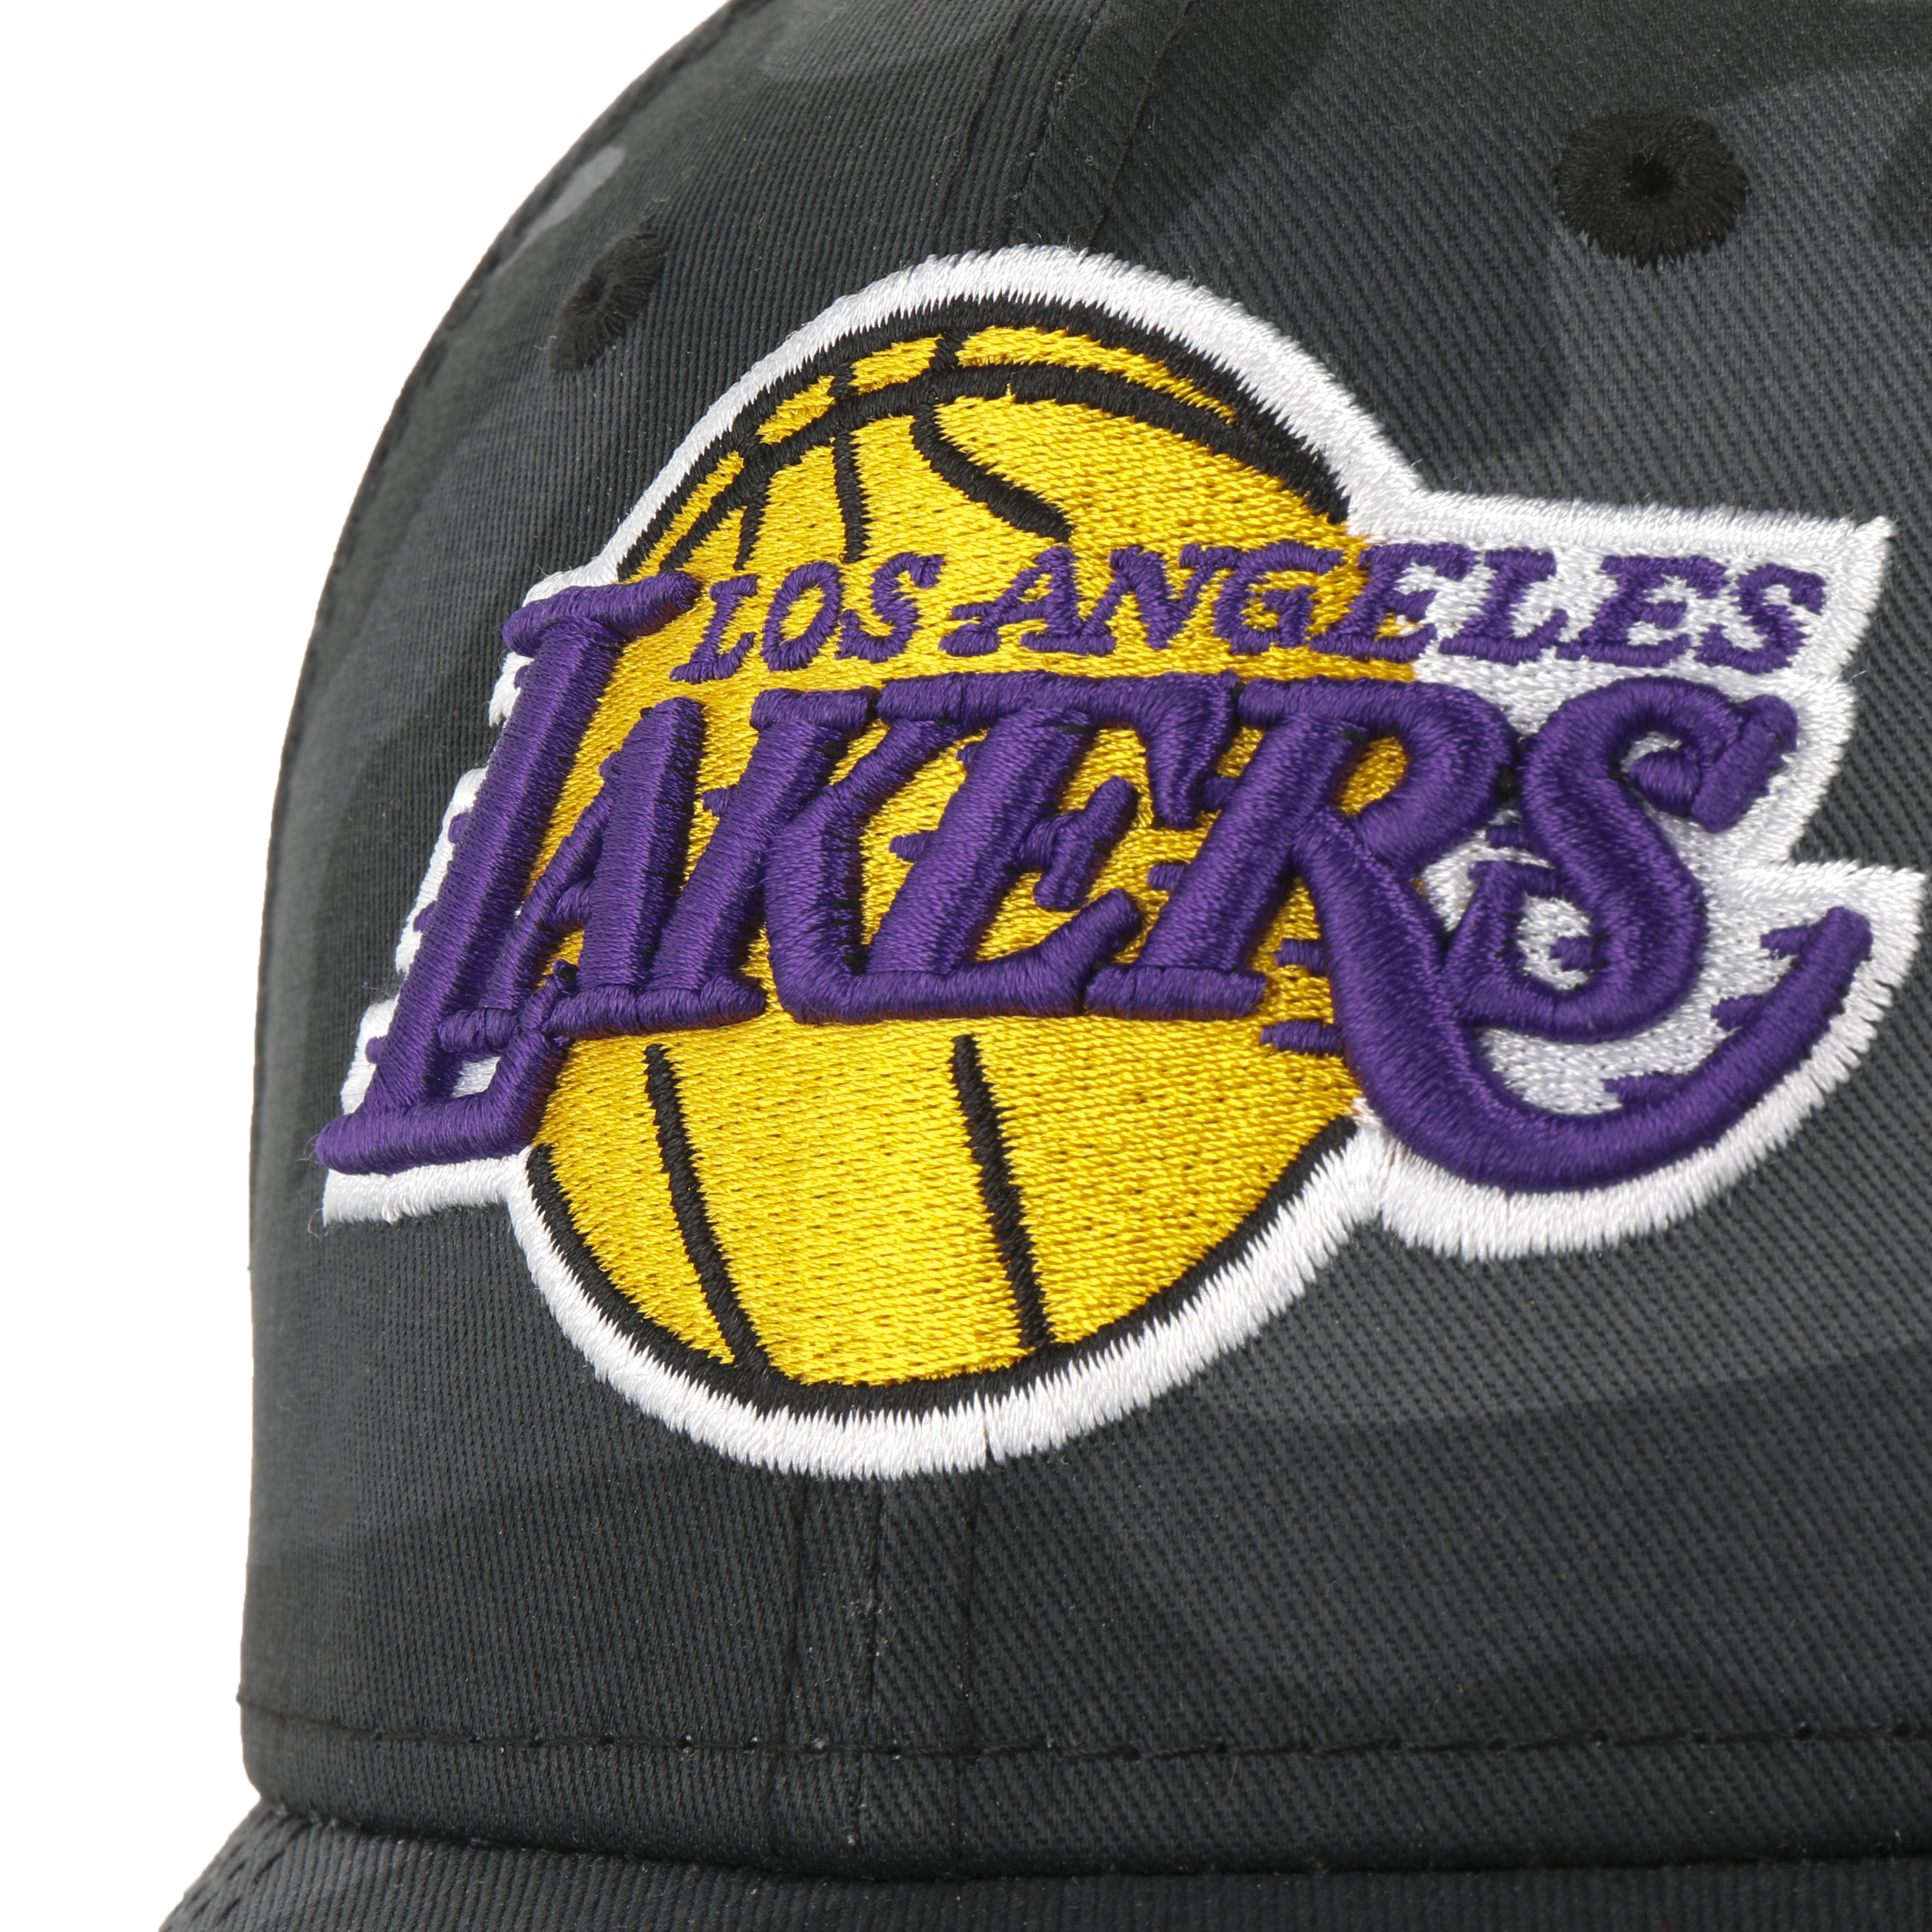 Los Angeles Lakers NBA Team Camo Snapback Hat for Sale in